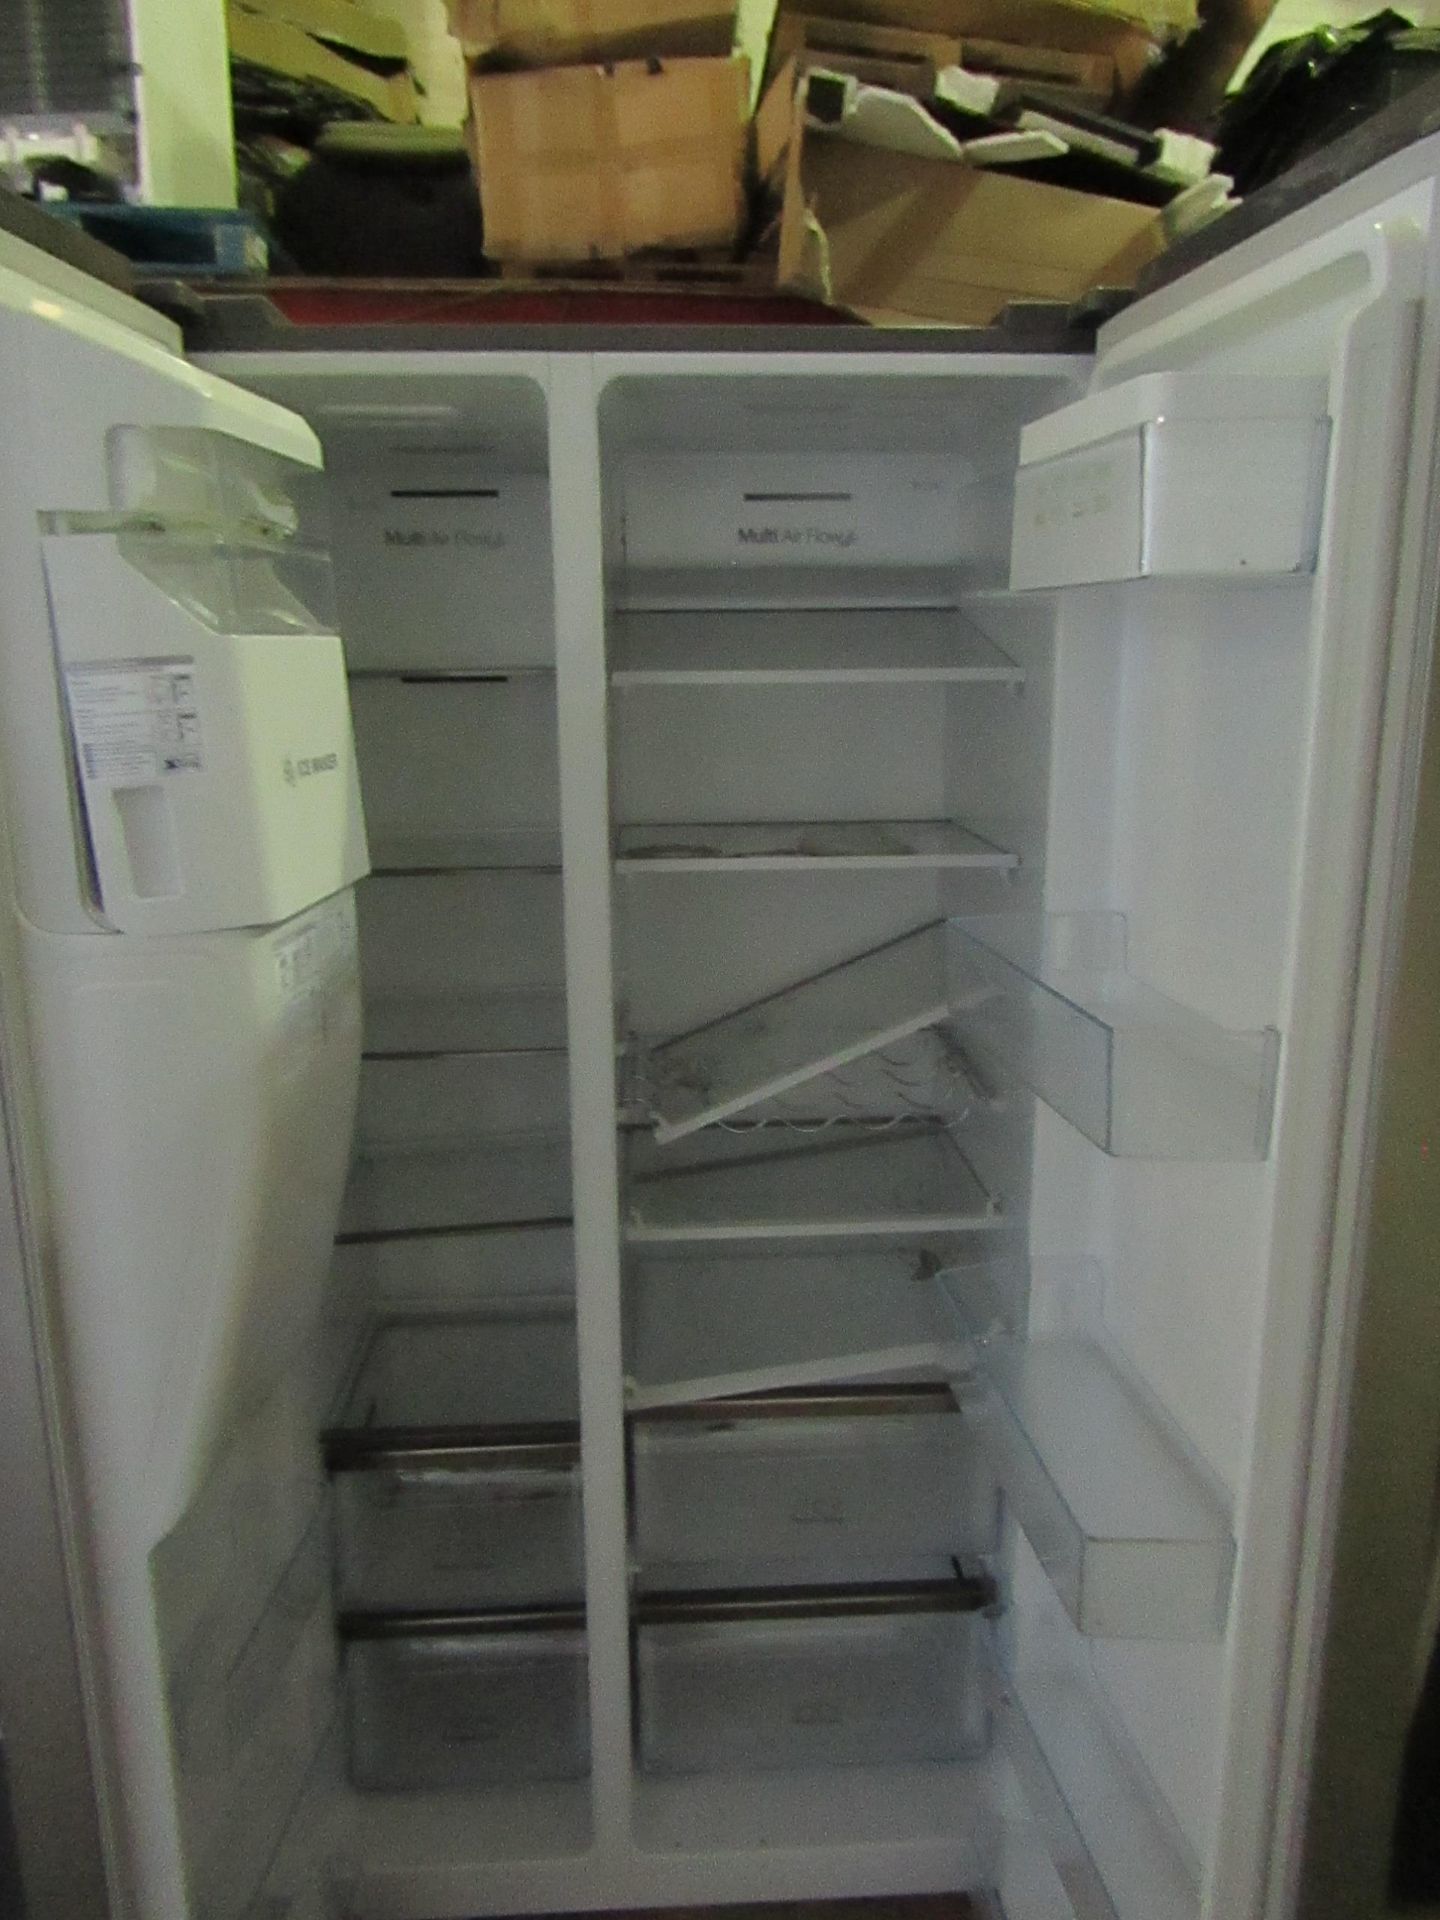 hisense American fridge freezer with water and ice dispenser, the fridge nad freezer with tested and - Image 2 of 3